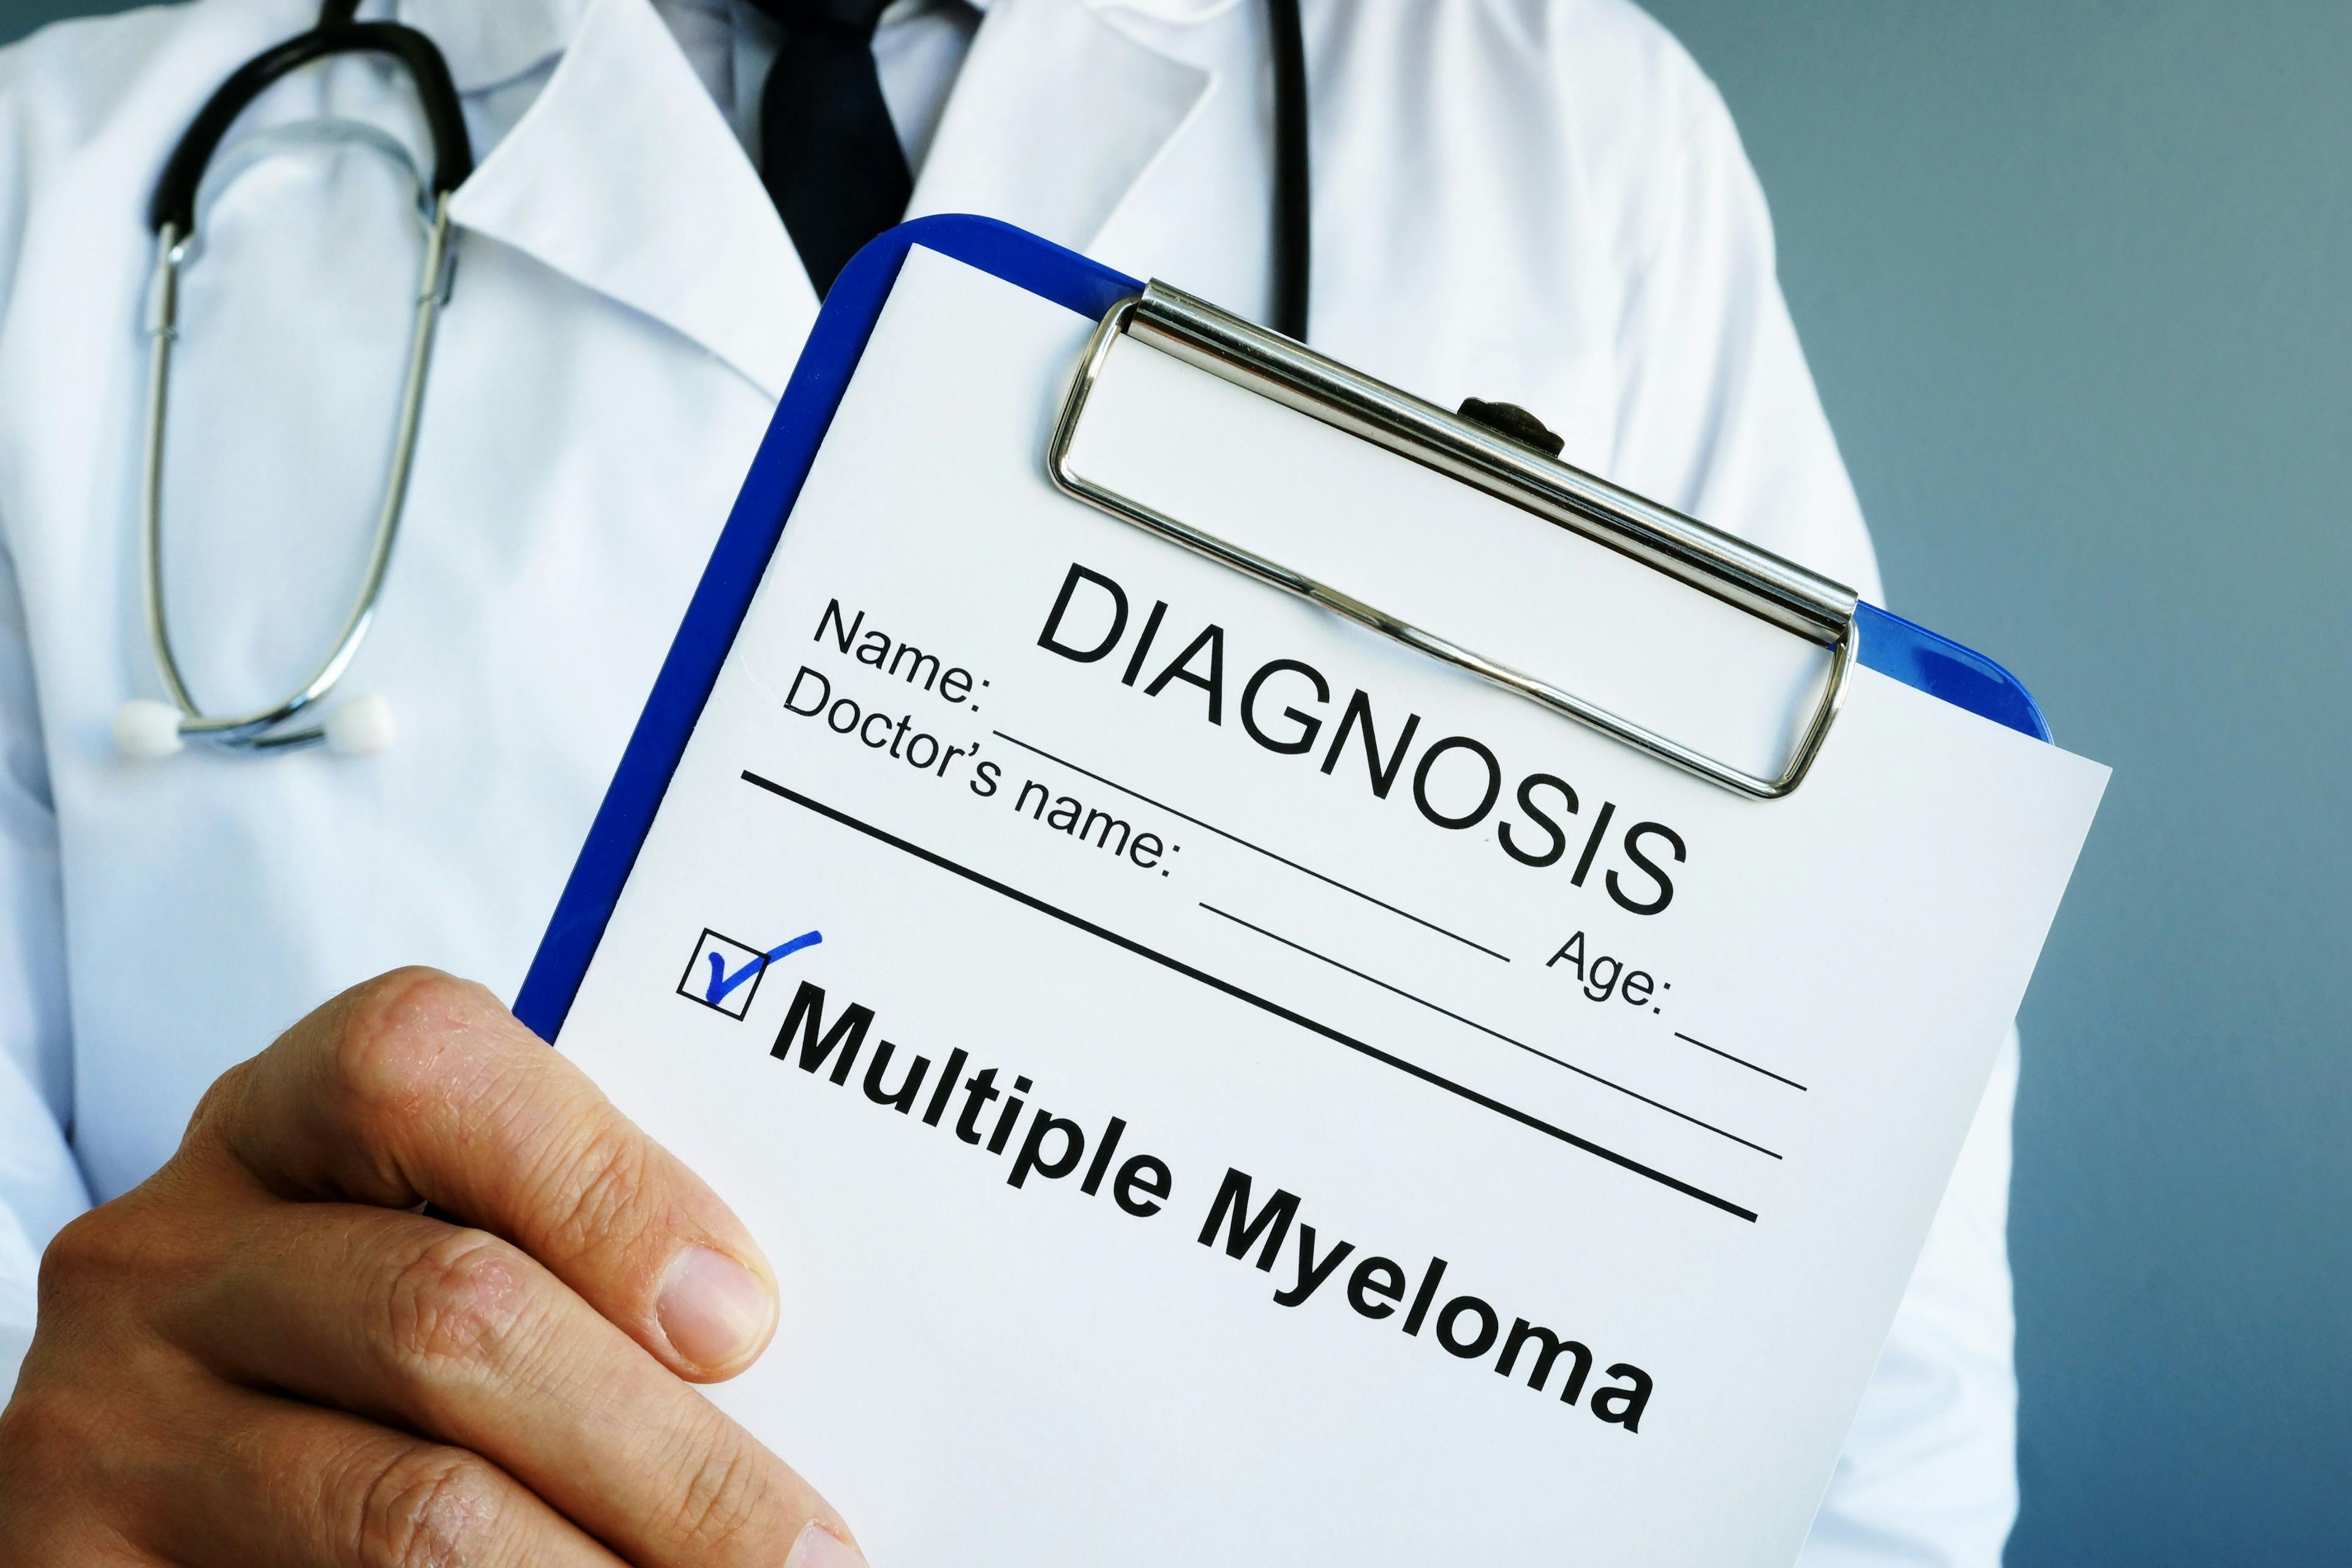 Health care provider with multiple myeloma diagnosis papers -- Image credit: Vitalii Vodolazskyi | stock.adobe.com